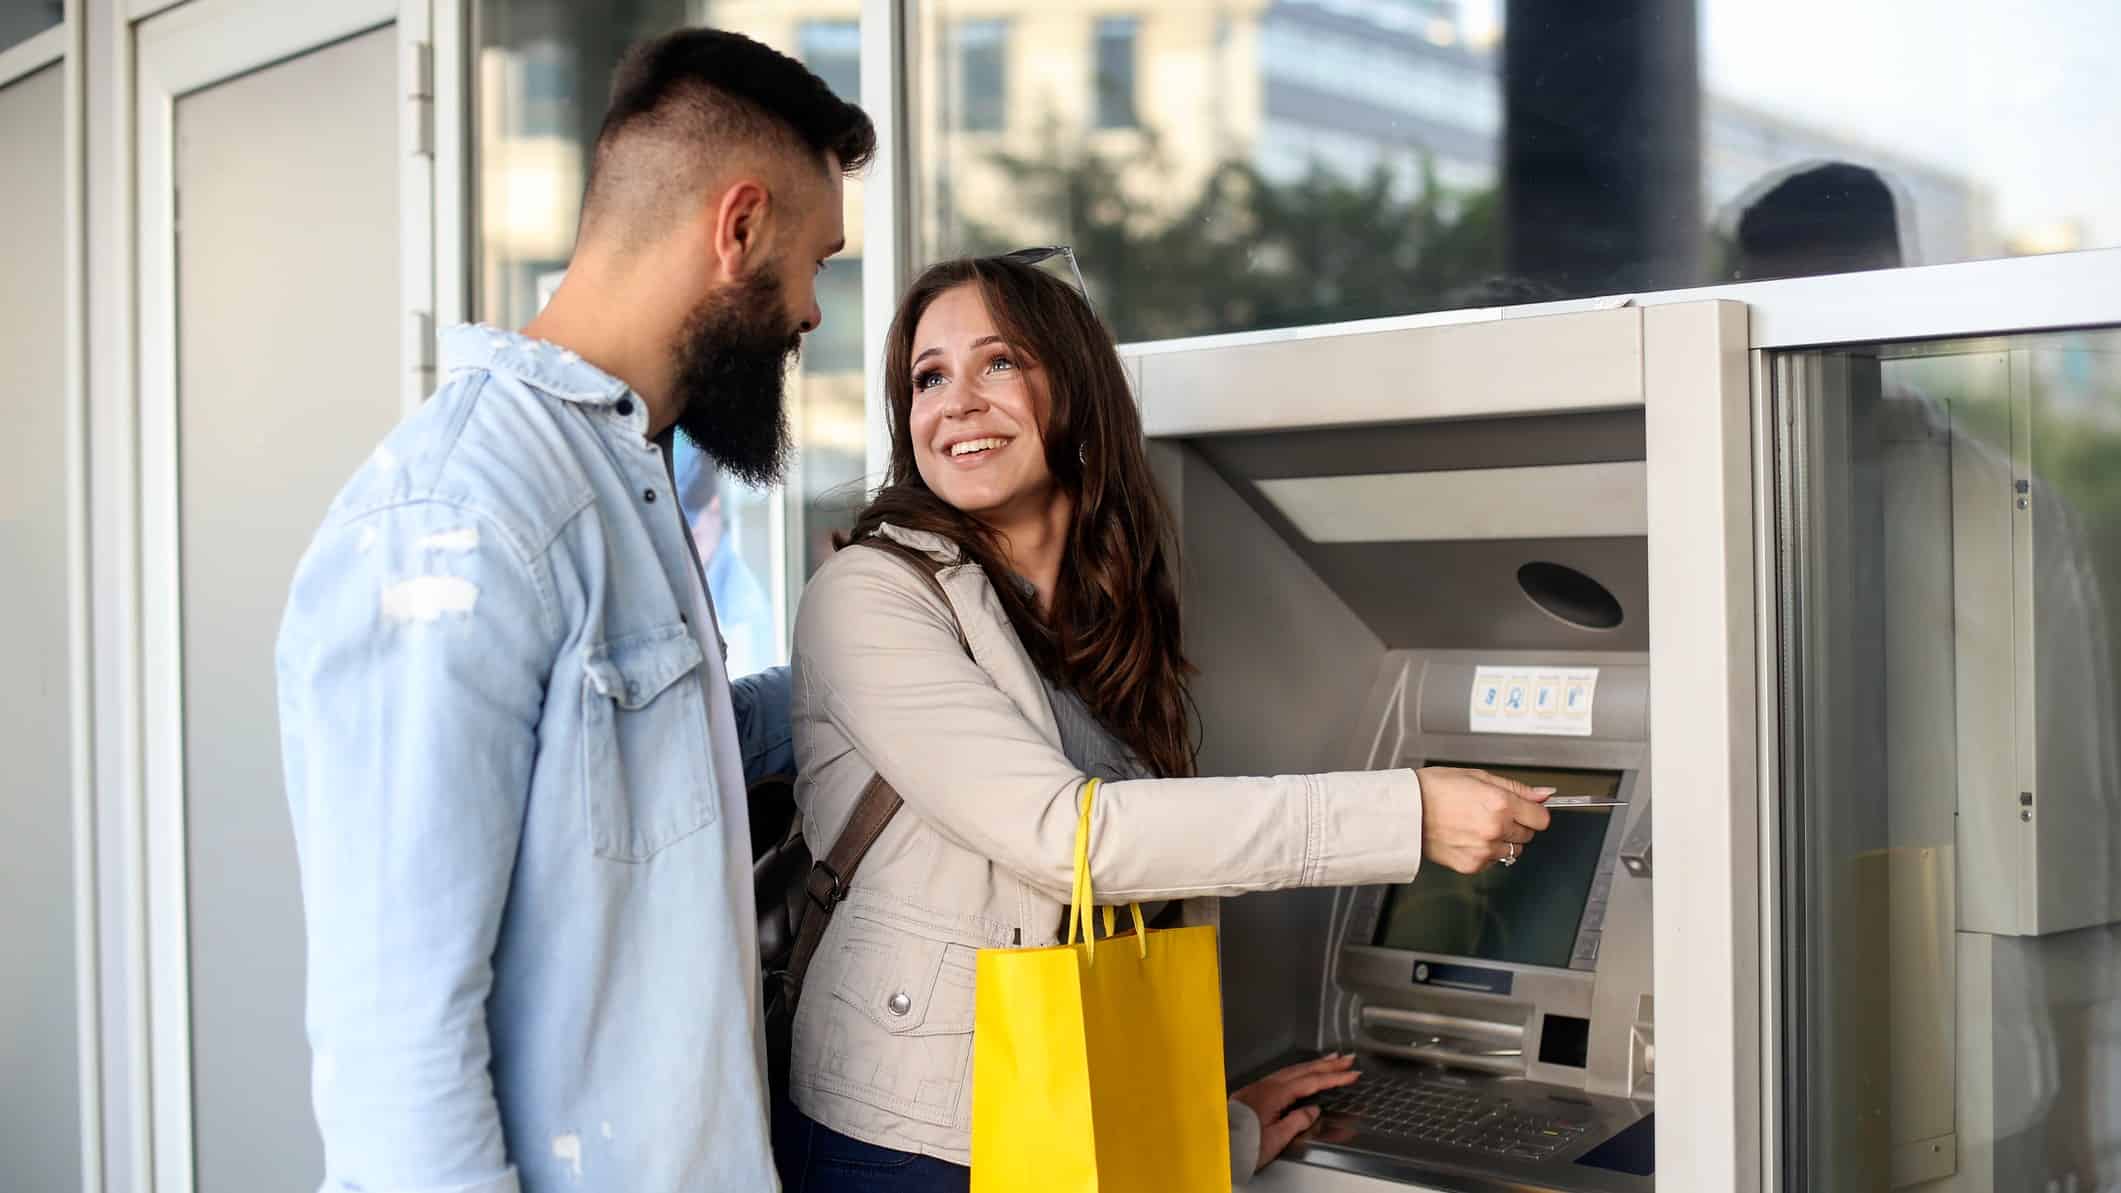 Happy couple at Bank ATM machine.